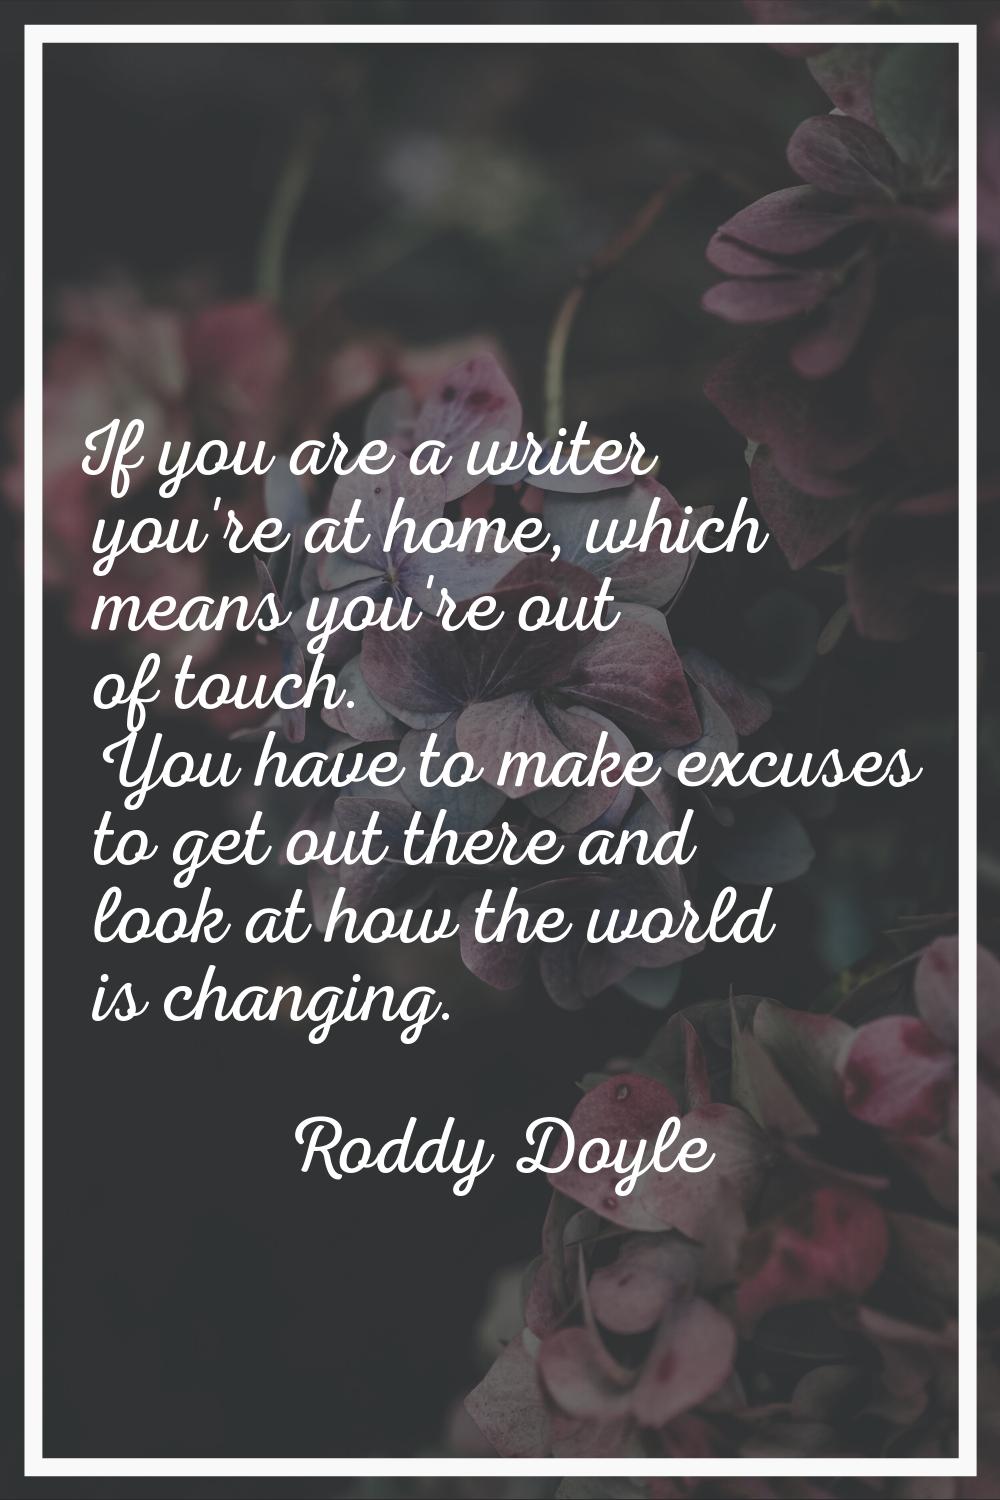 If you are a writer you're at home, which means you're out of touch. You have to make excuses to ge